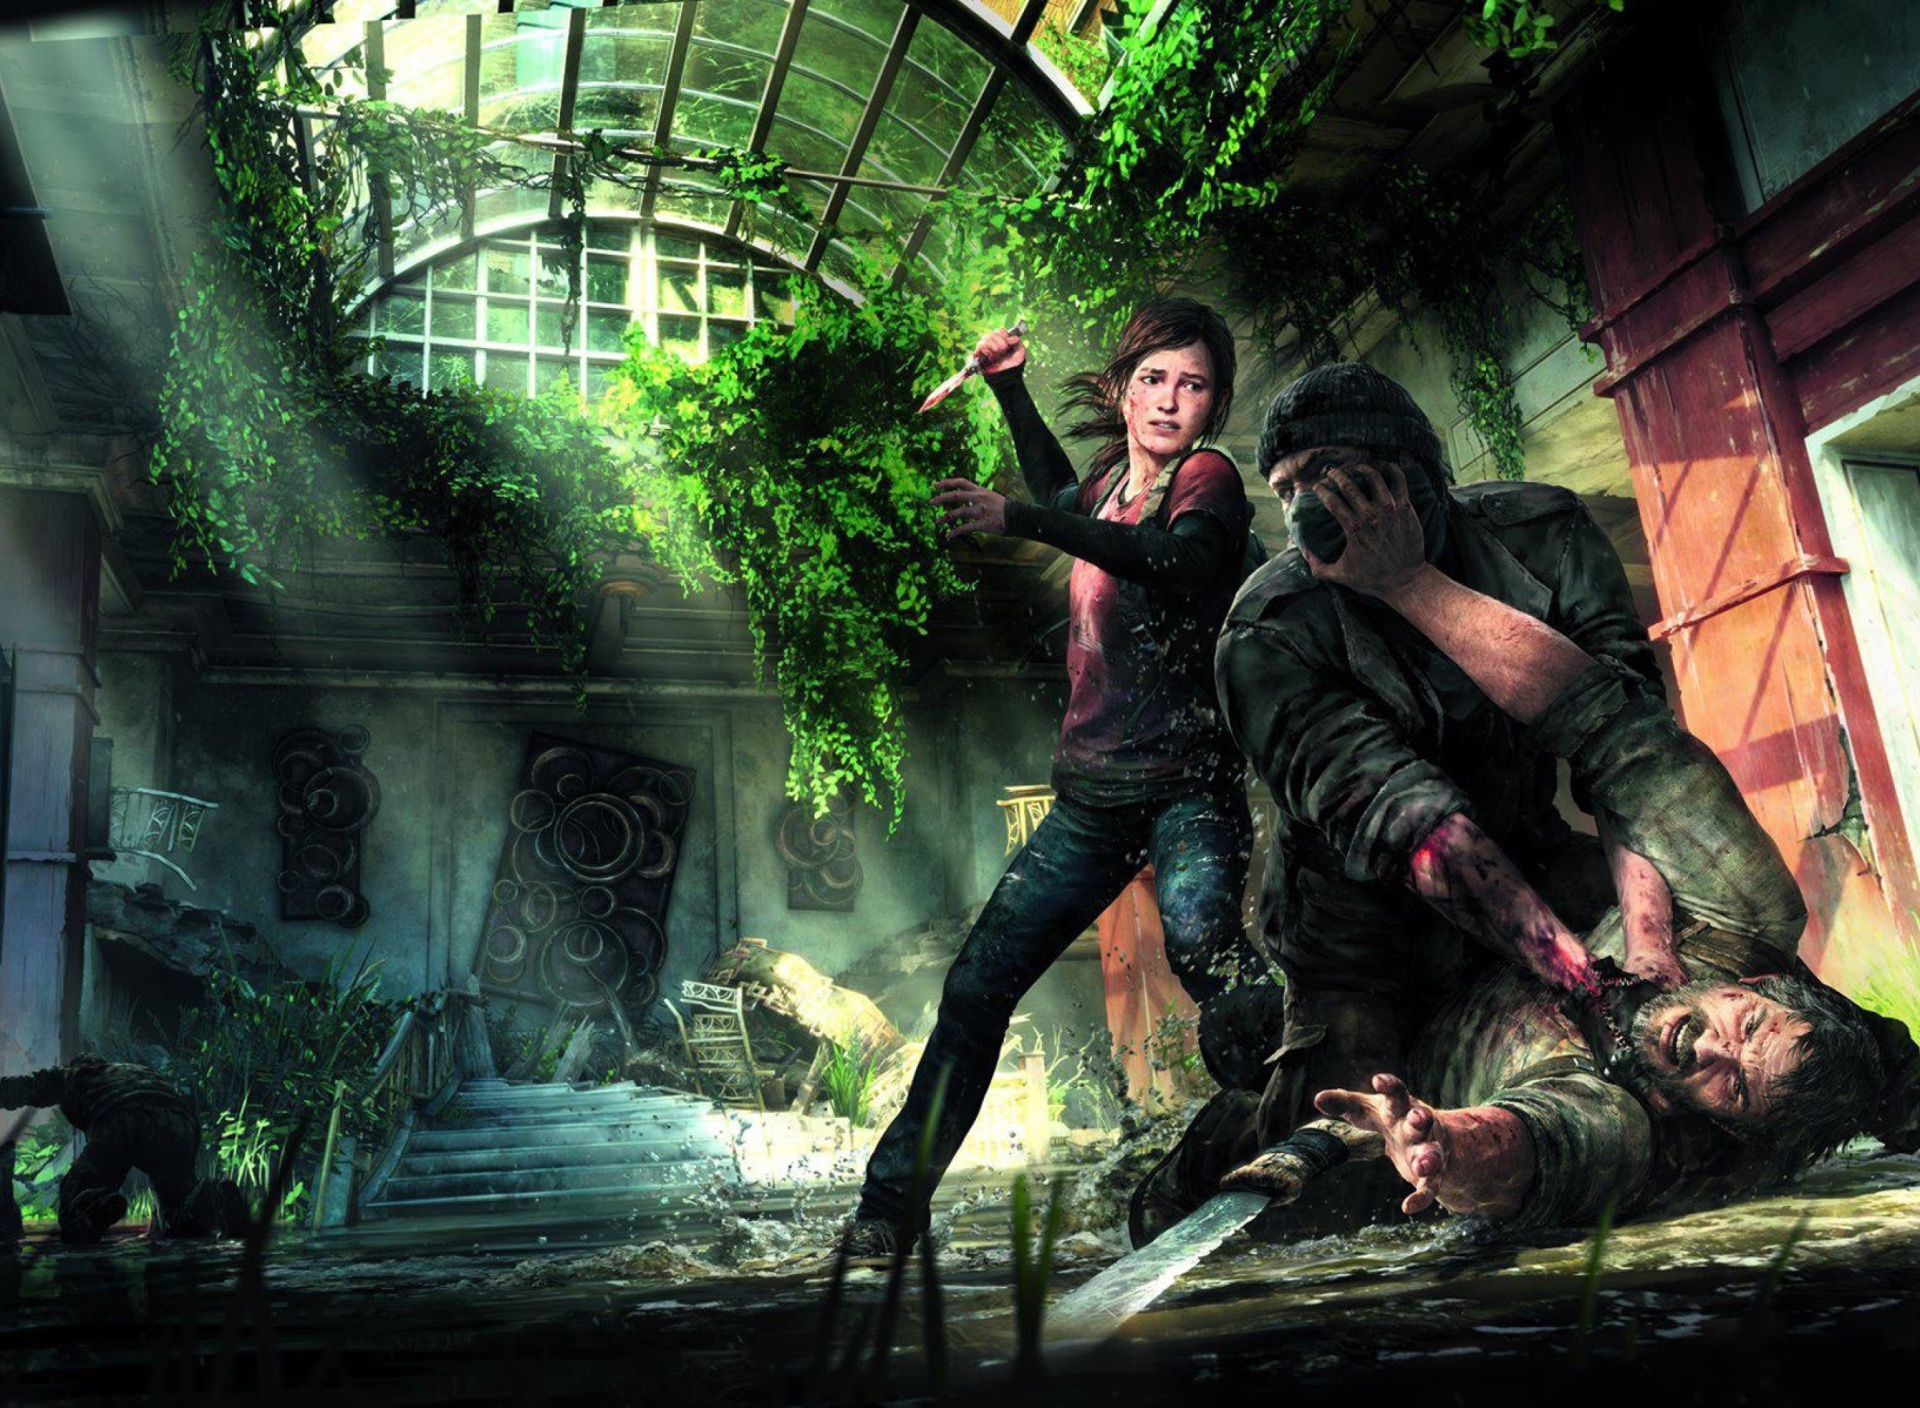 The Last Of Us Naughty Dog for Playstation 3 wallpaper 1920x1408